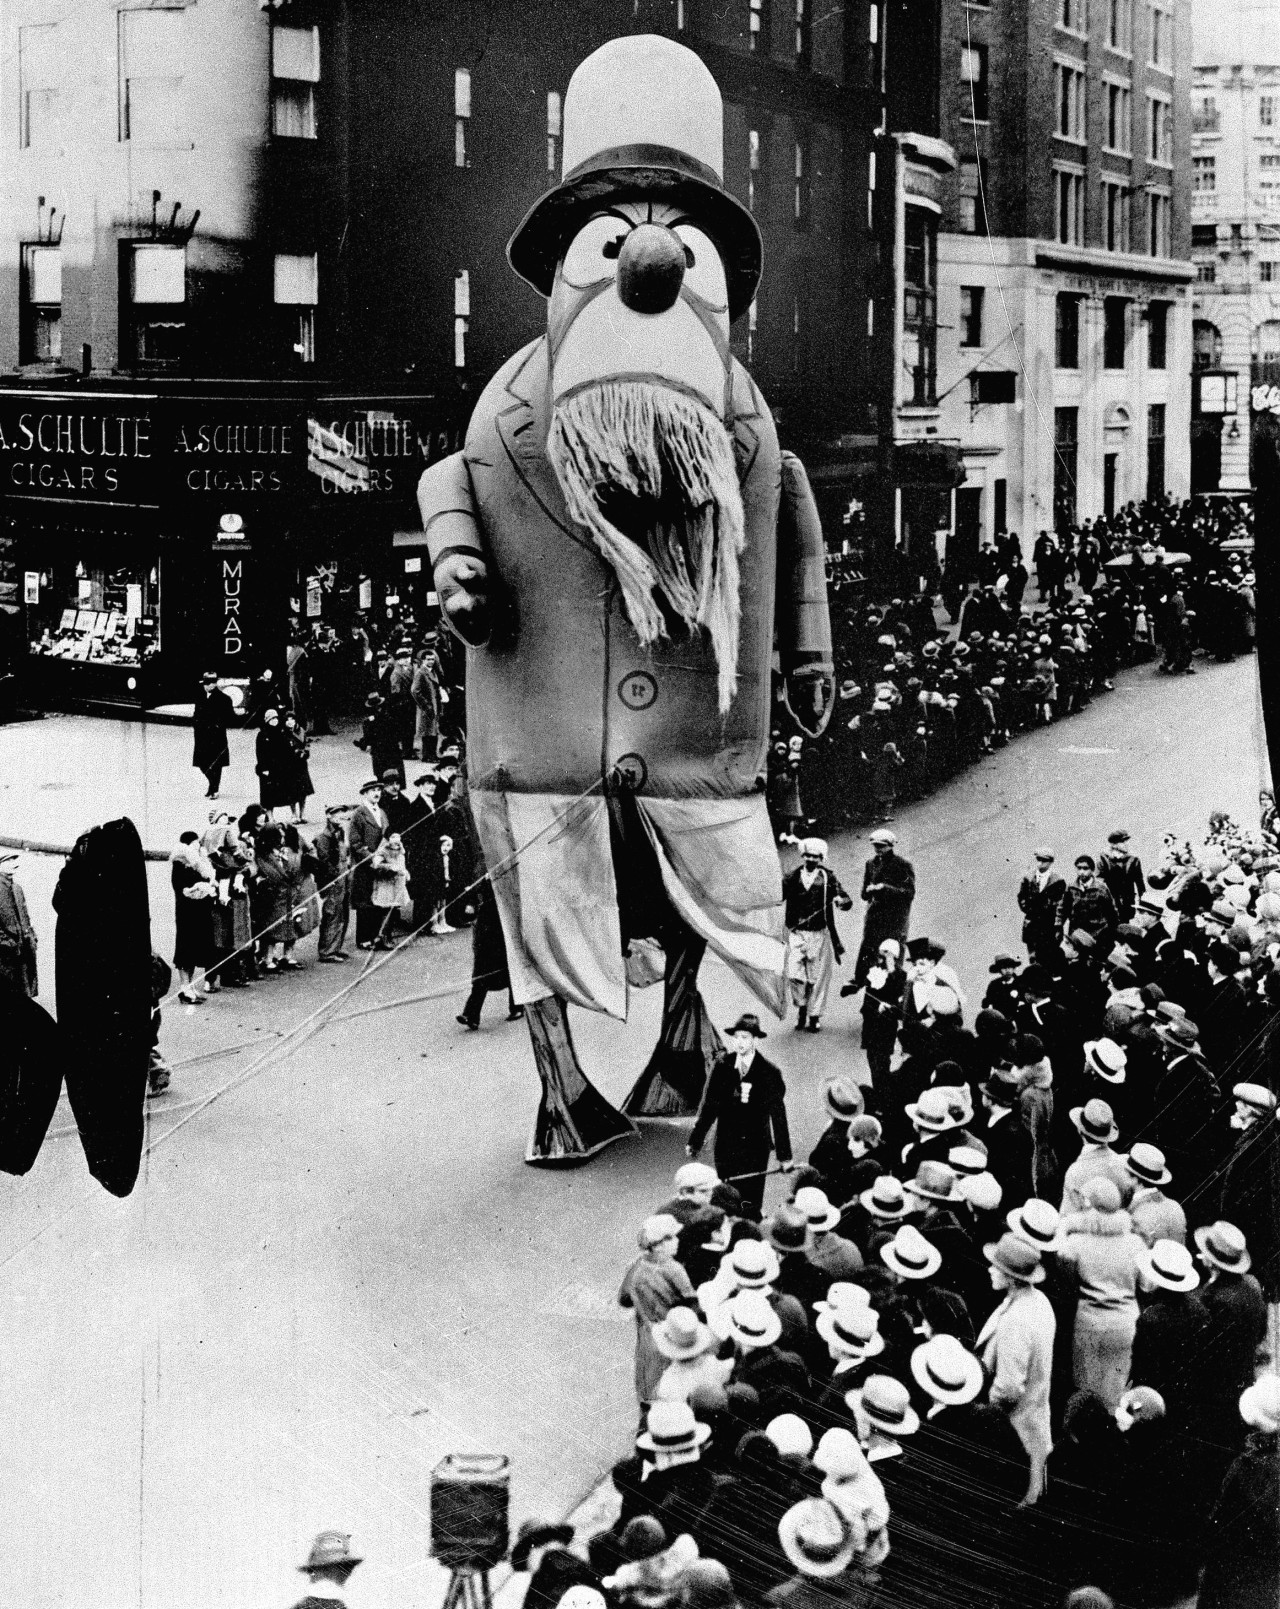 A Captain Nemo float makes its way down the street during the 1929 Macy's Thanksgiving Day Parade in New York City. (AP)